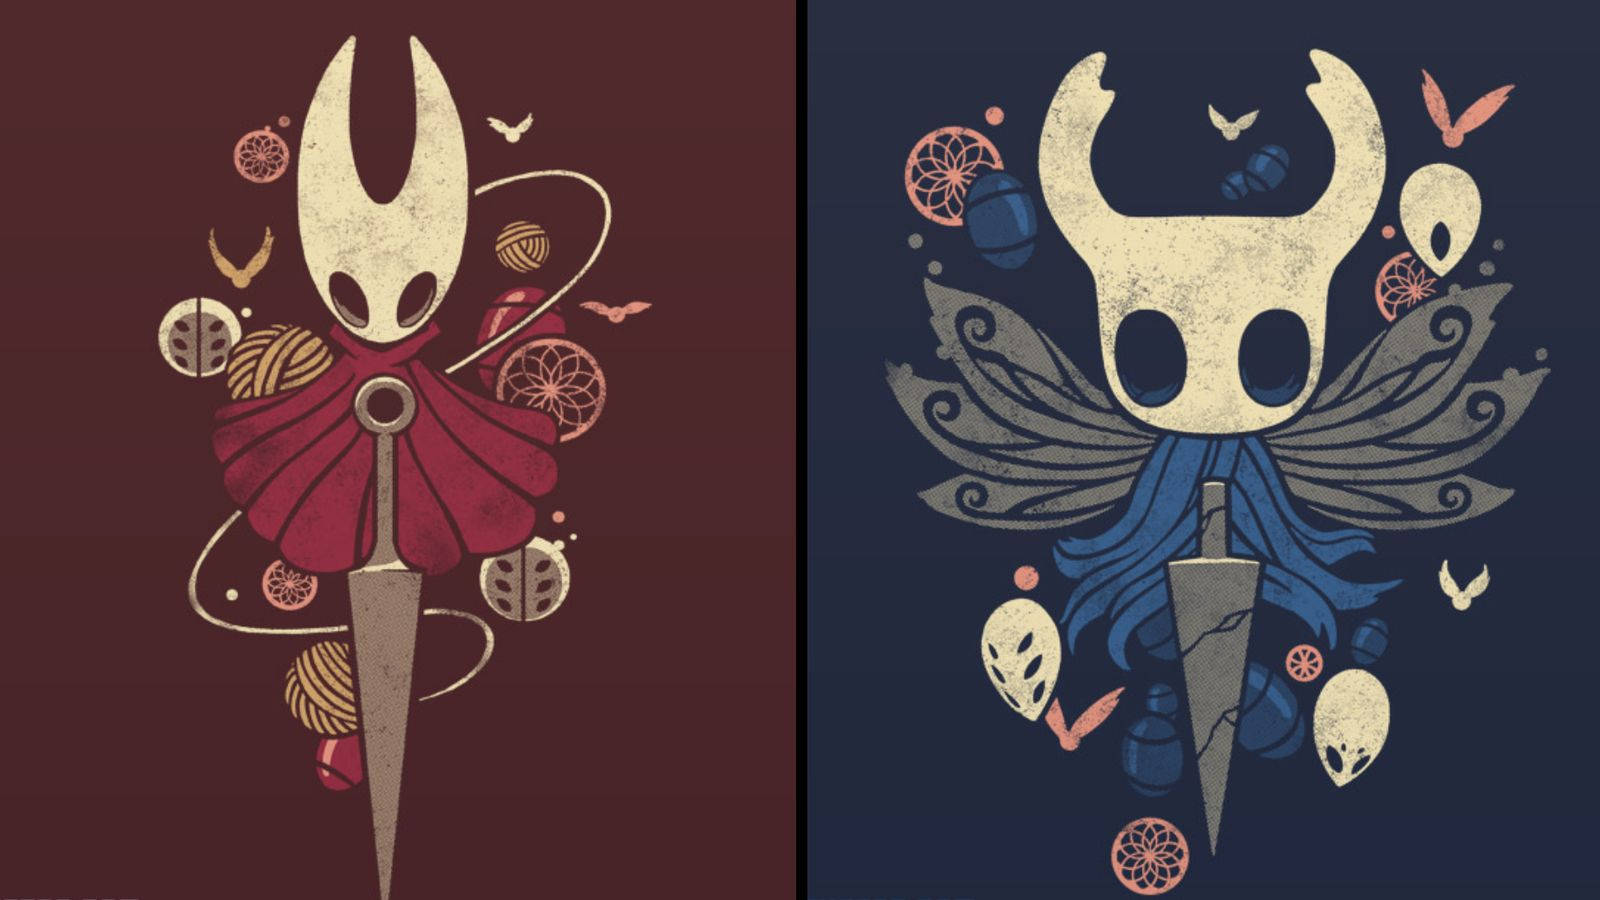 Hornet And Hollow Knight Artwork